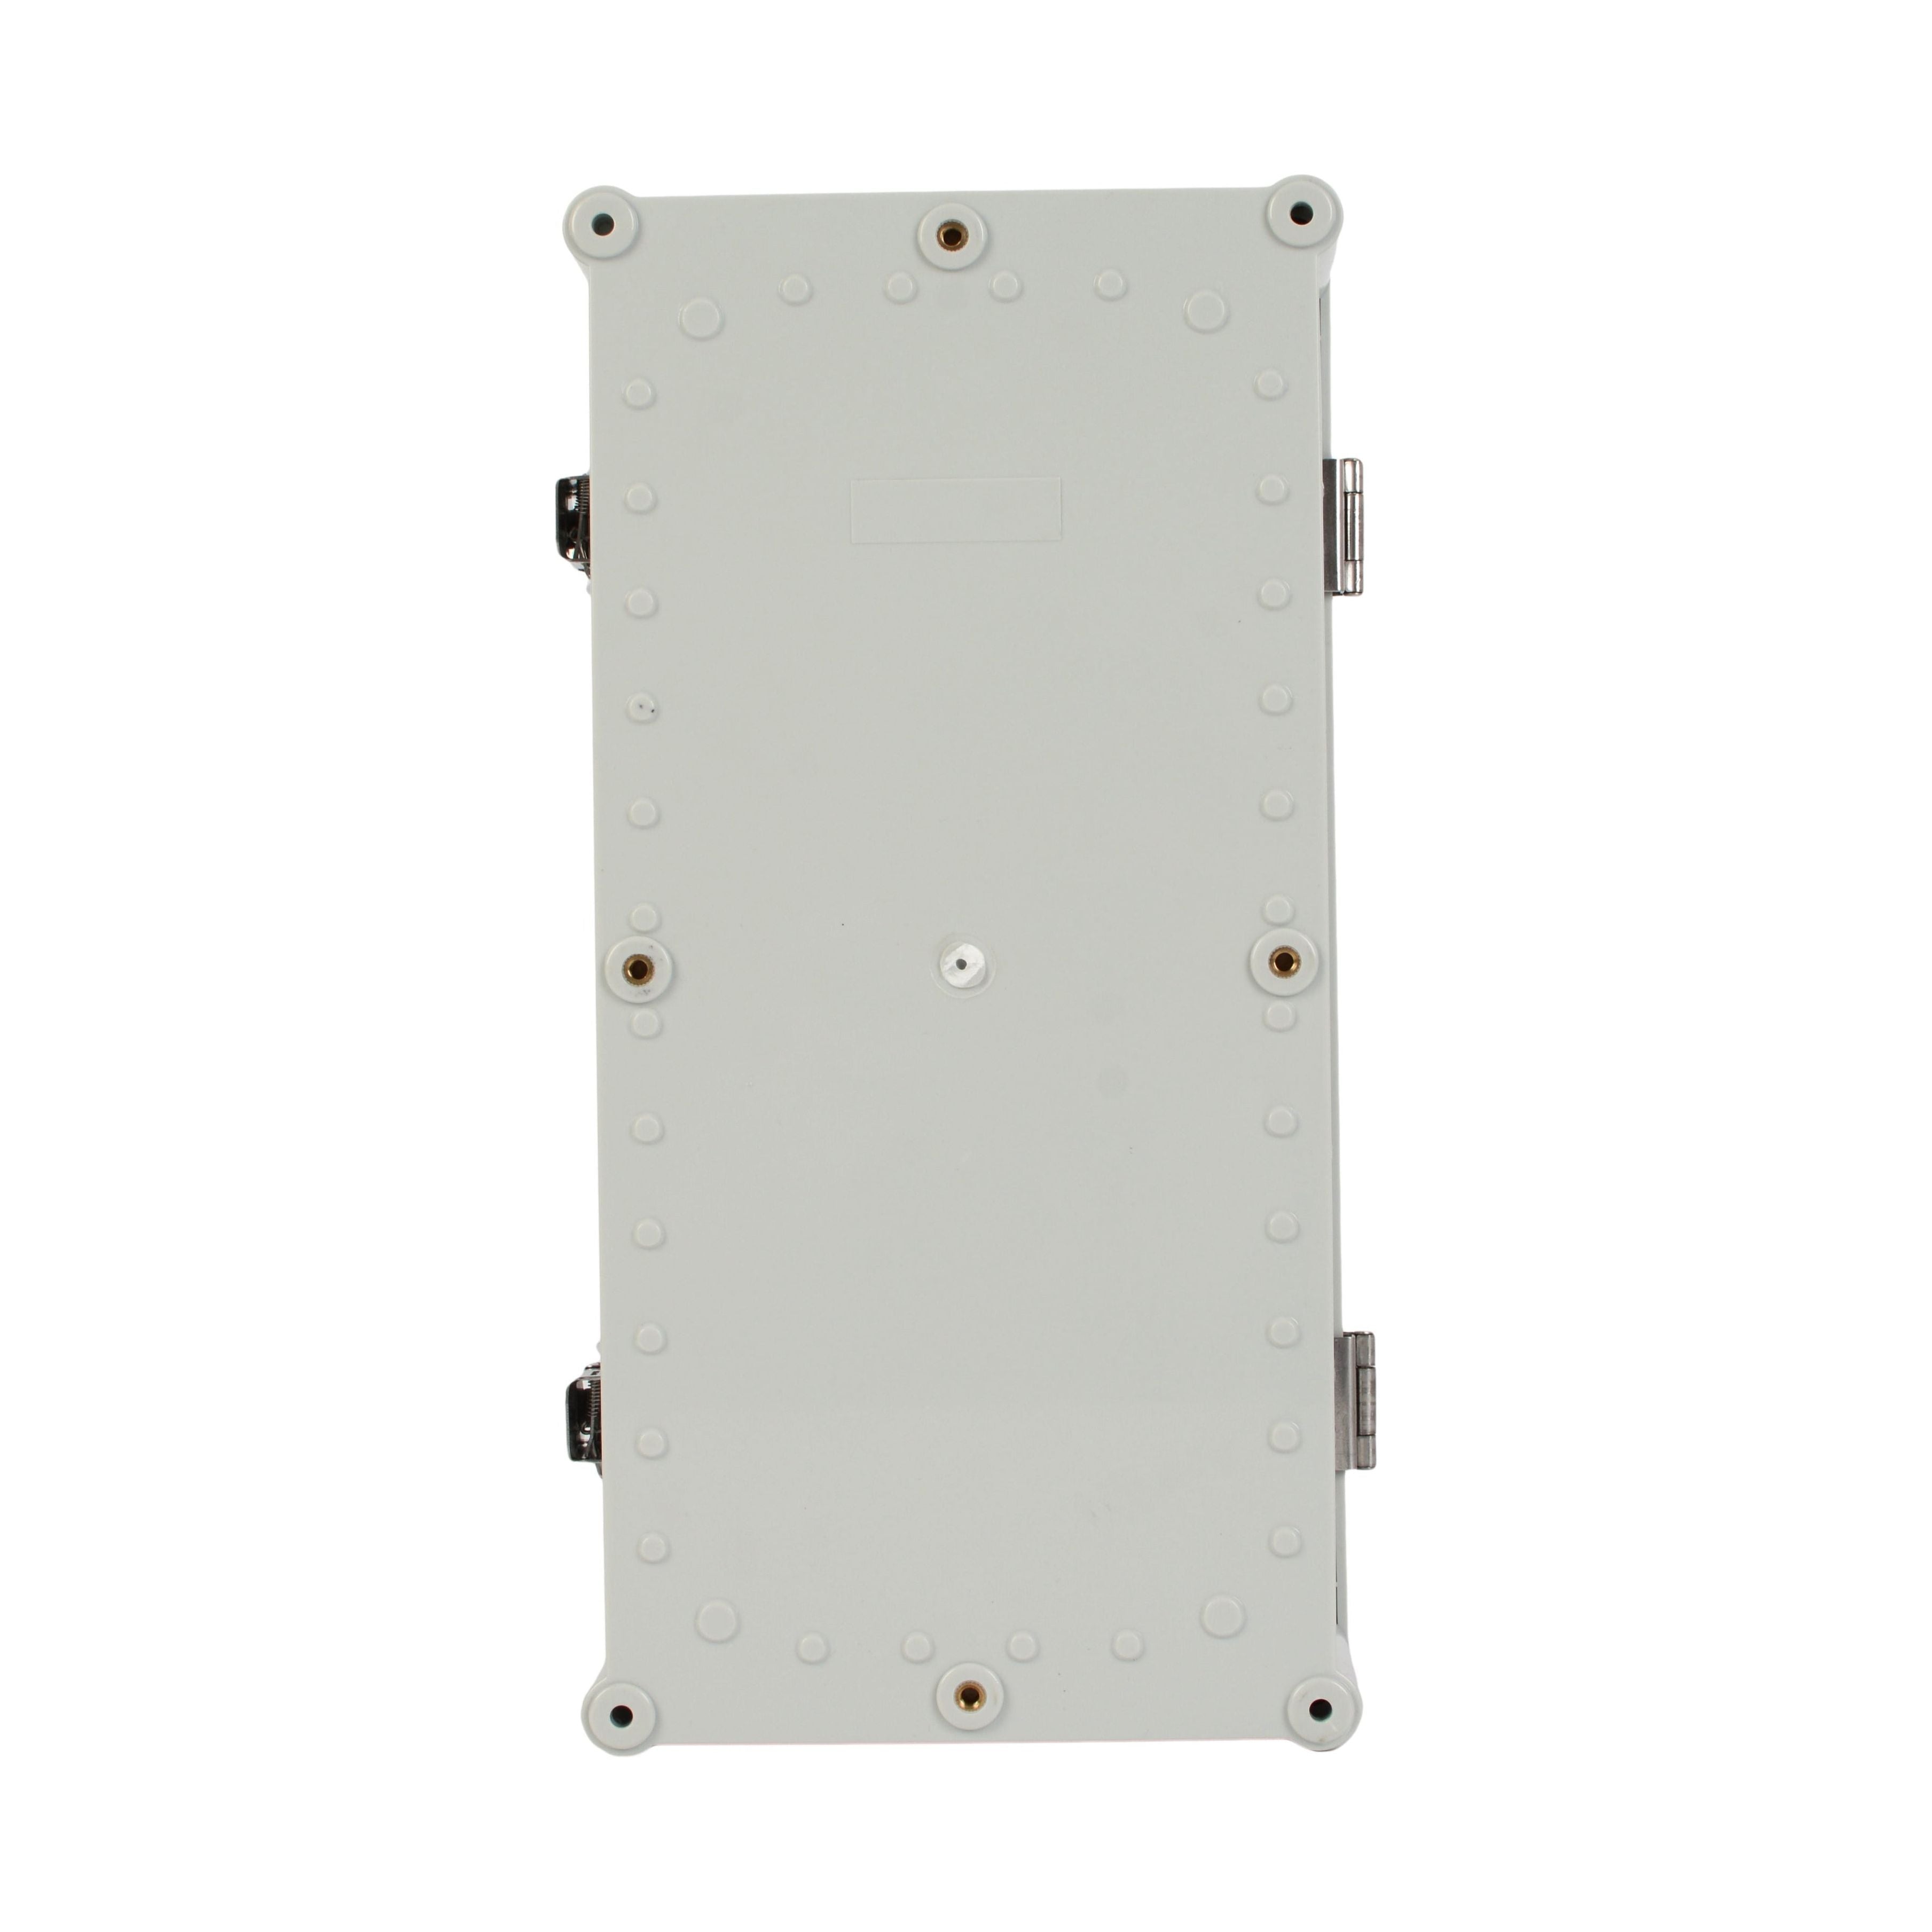 ABS IP66 Clear Lid Hinge Junction Box 380 x 190 x 130mm